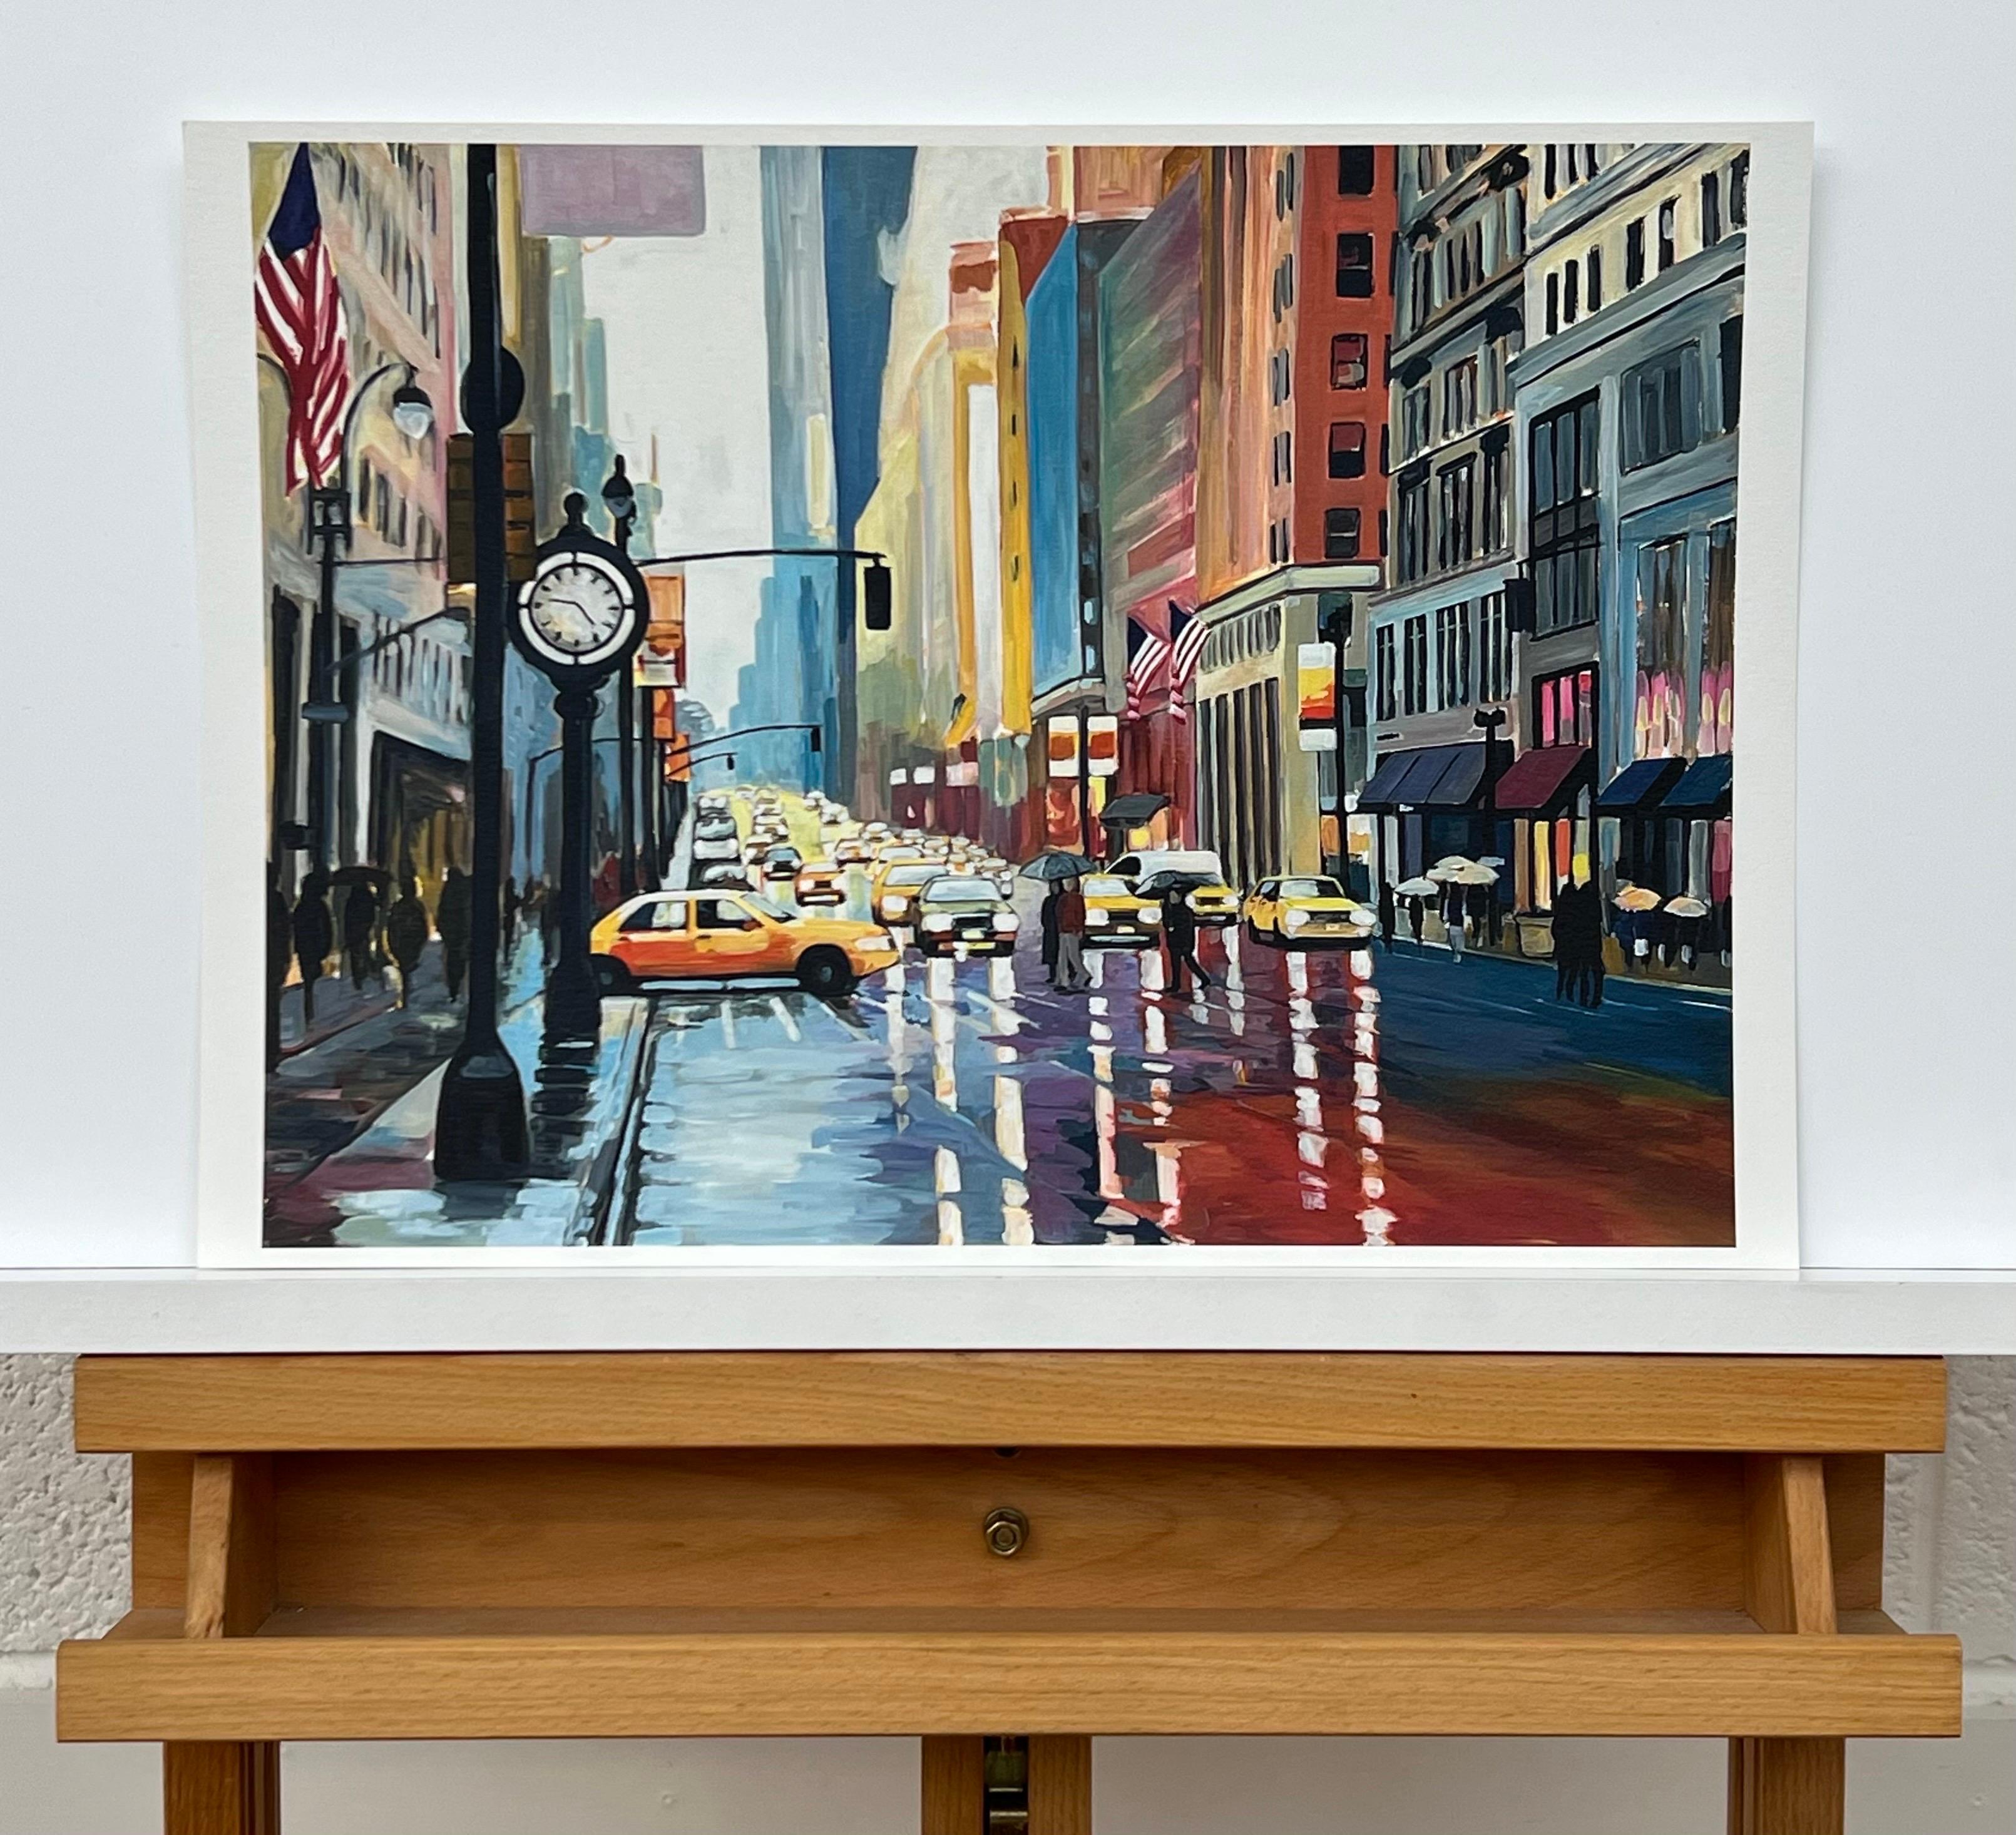 High Quality Print of New York Rain III Painting by leading British Urban Artist, Angela Wakefield. Part of her New York Series. Hand signed by the artist. 

Art measures 16 x 12 inches 

The character of New York’s skyline and large residential